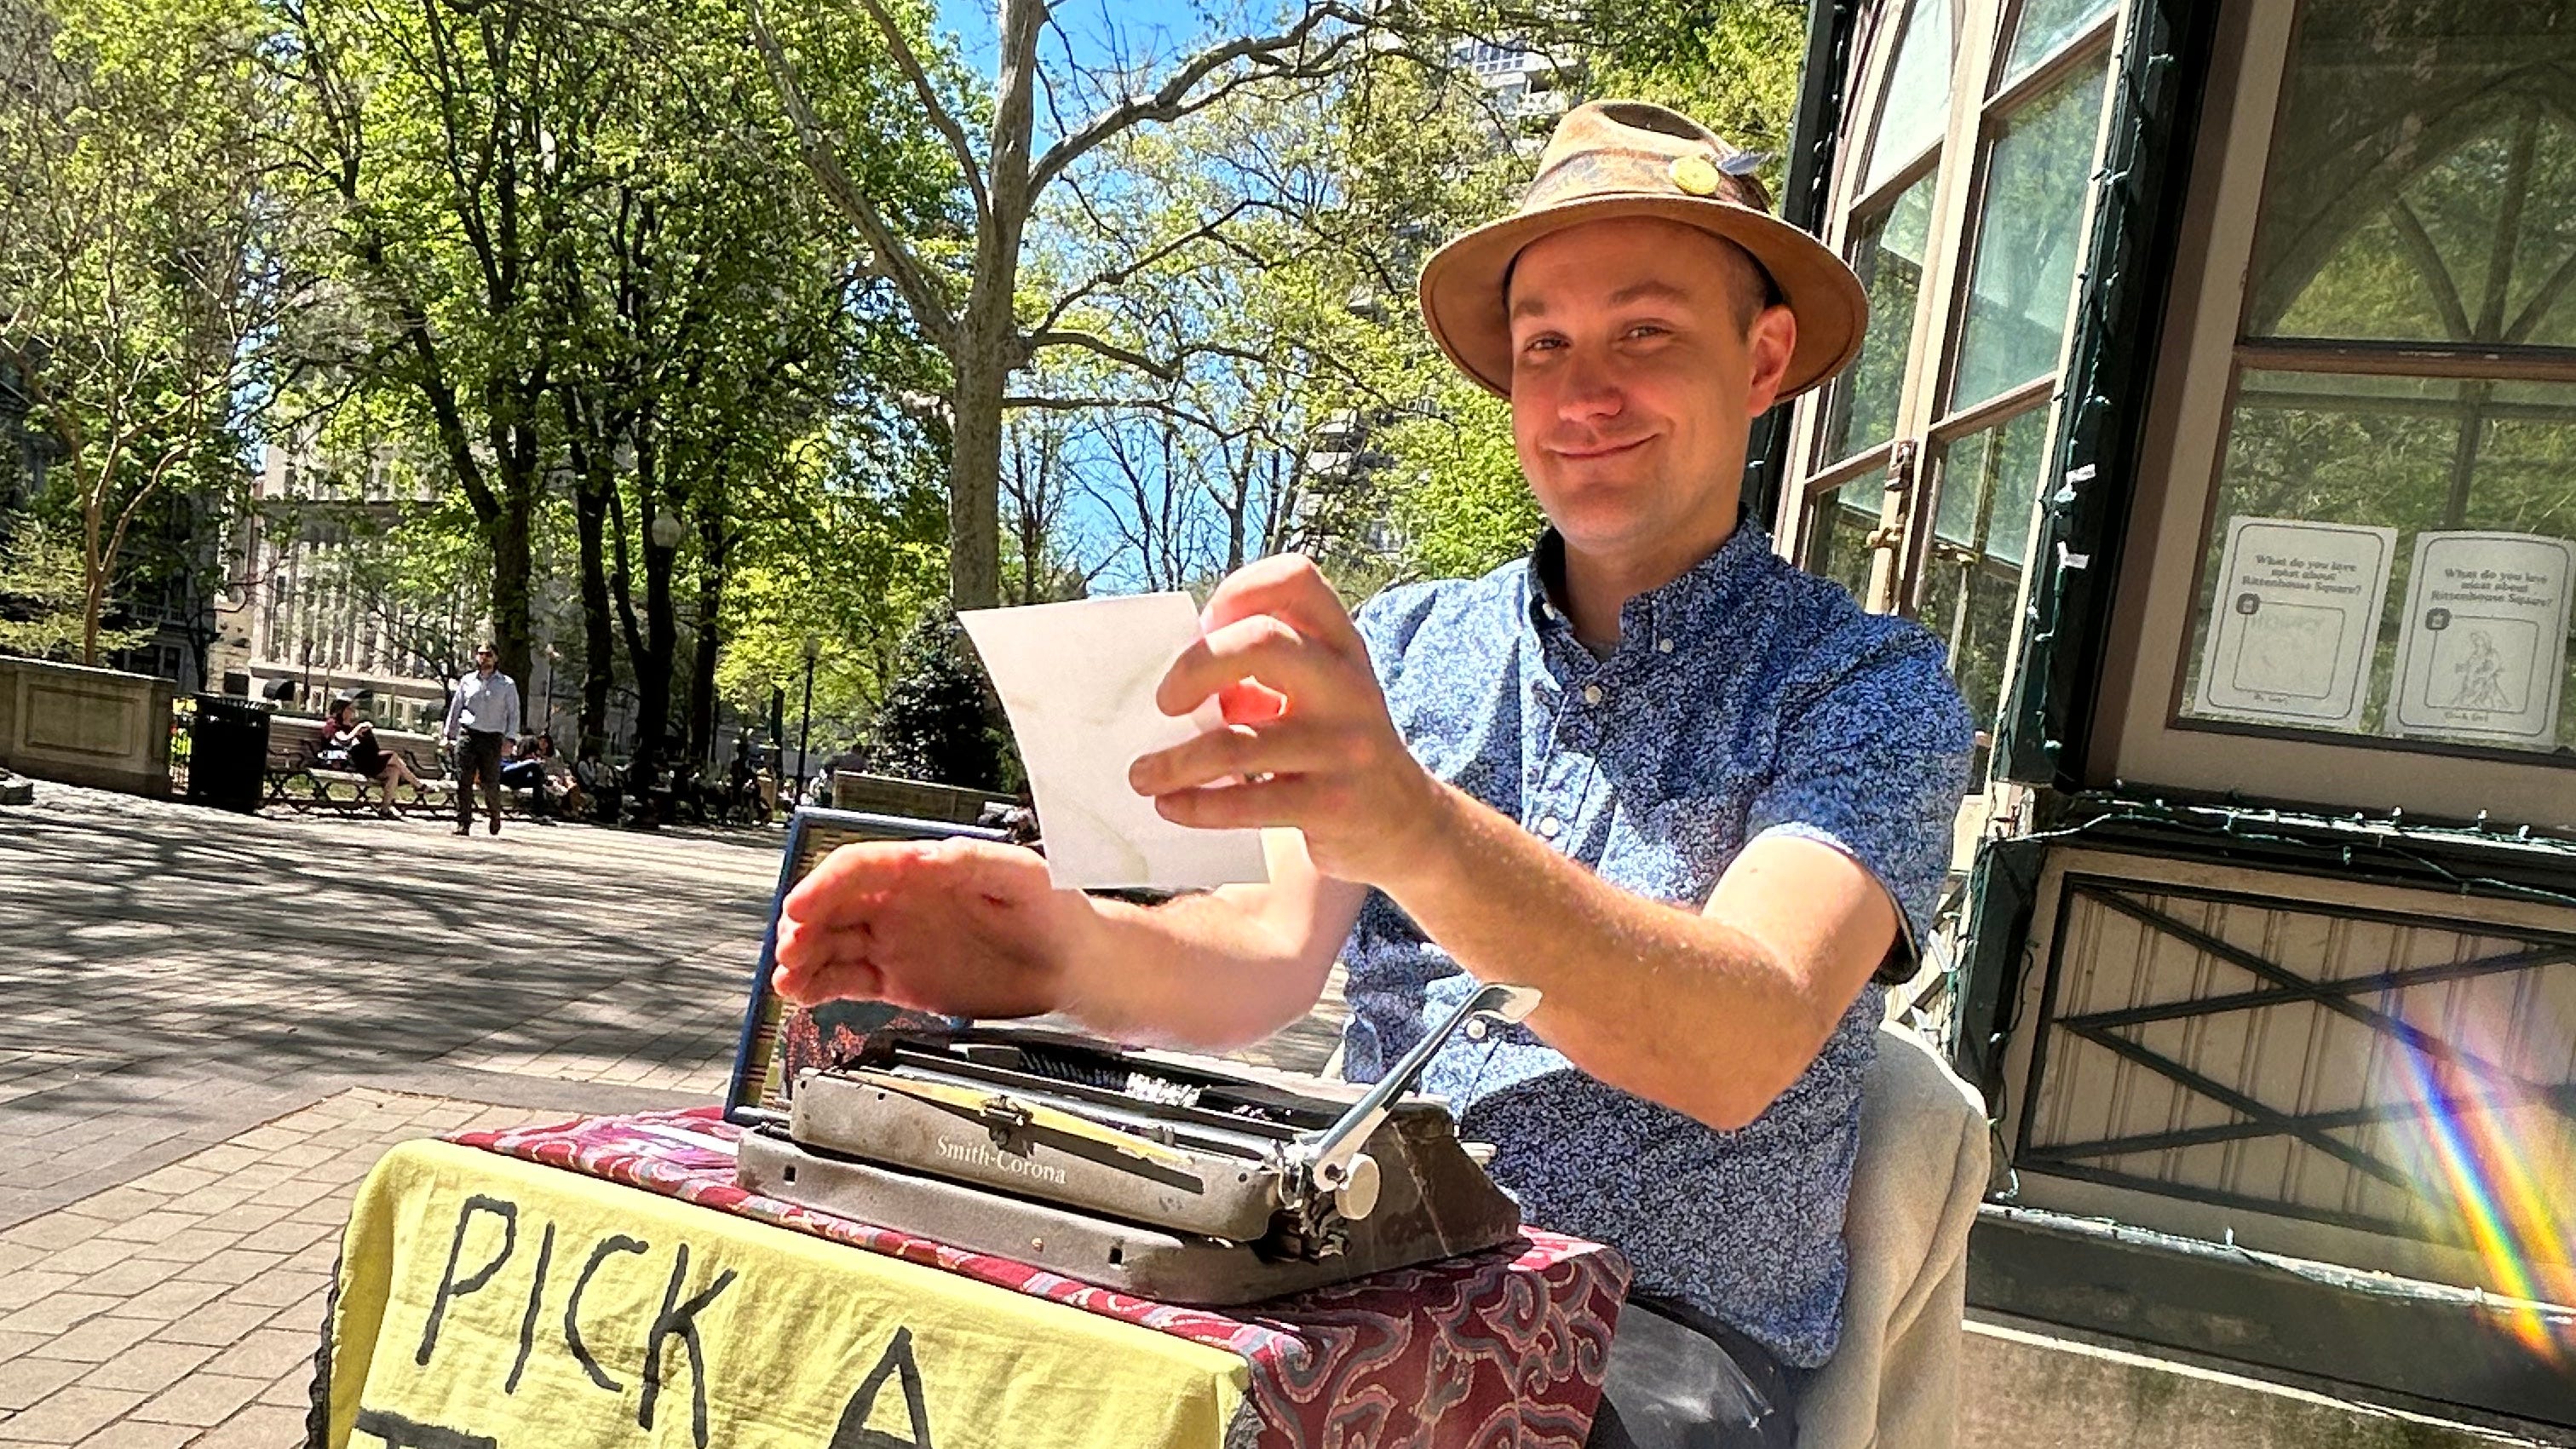  Need a poem? How one man cranks out verse − on a typewriter − in a Philadelphia park 